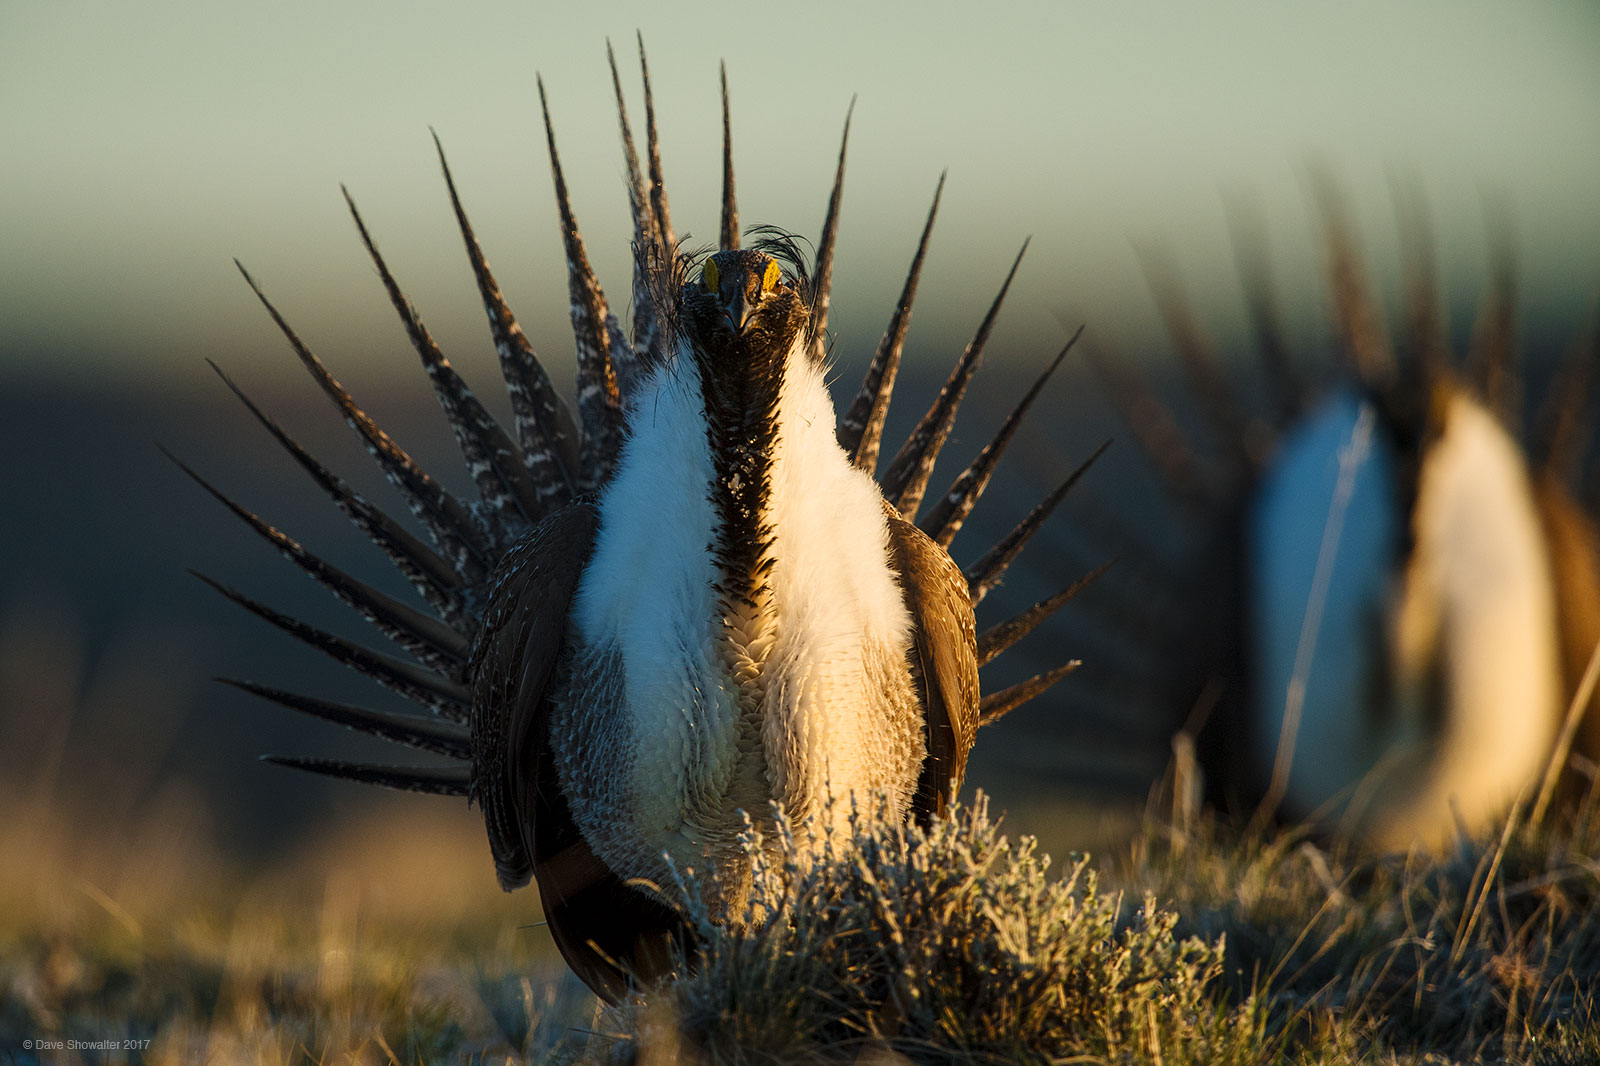 With one of the great courtship rituals, Greater Sage-grouse males strut, puff up chests, fight, and raise their spikes tail...